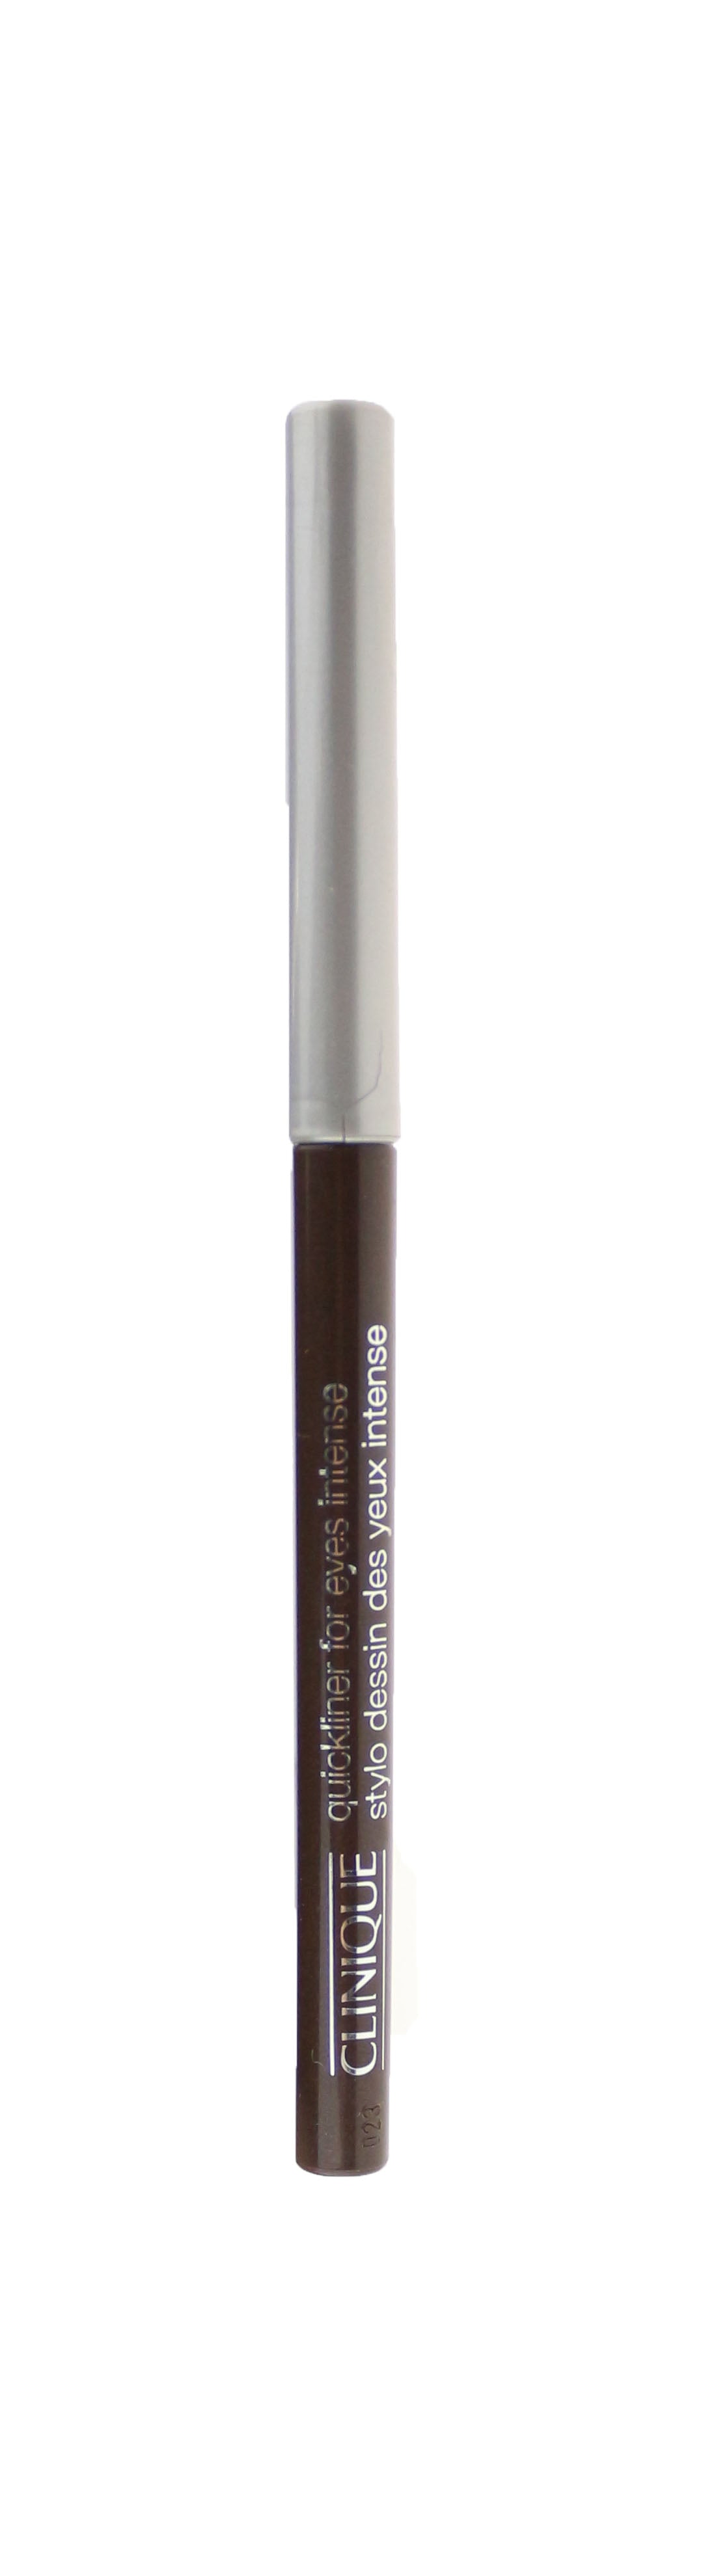 Clinique Quickliner For Eyes Intense 03 Intense Chocolate 0.01Oz New